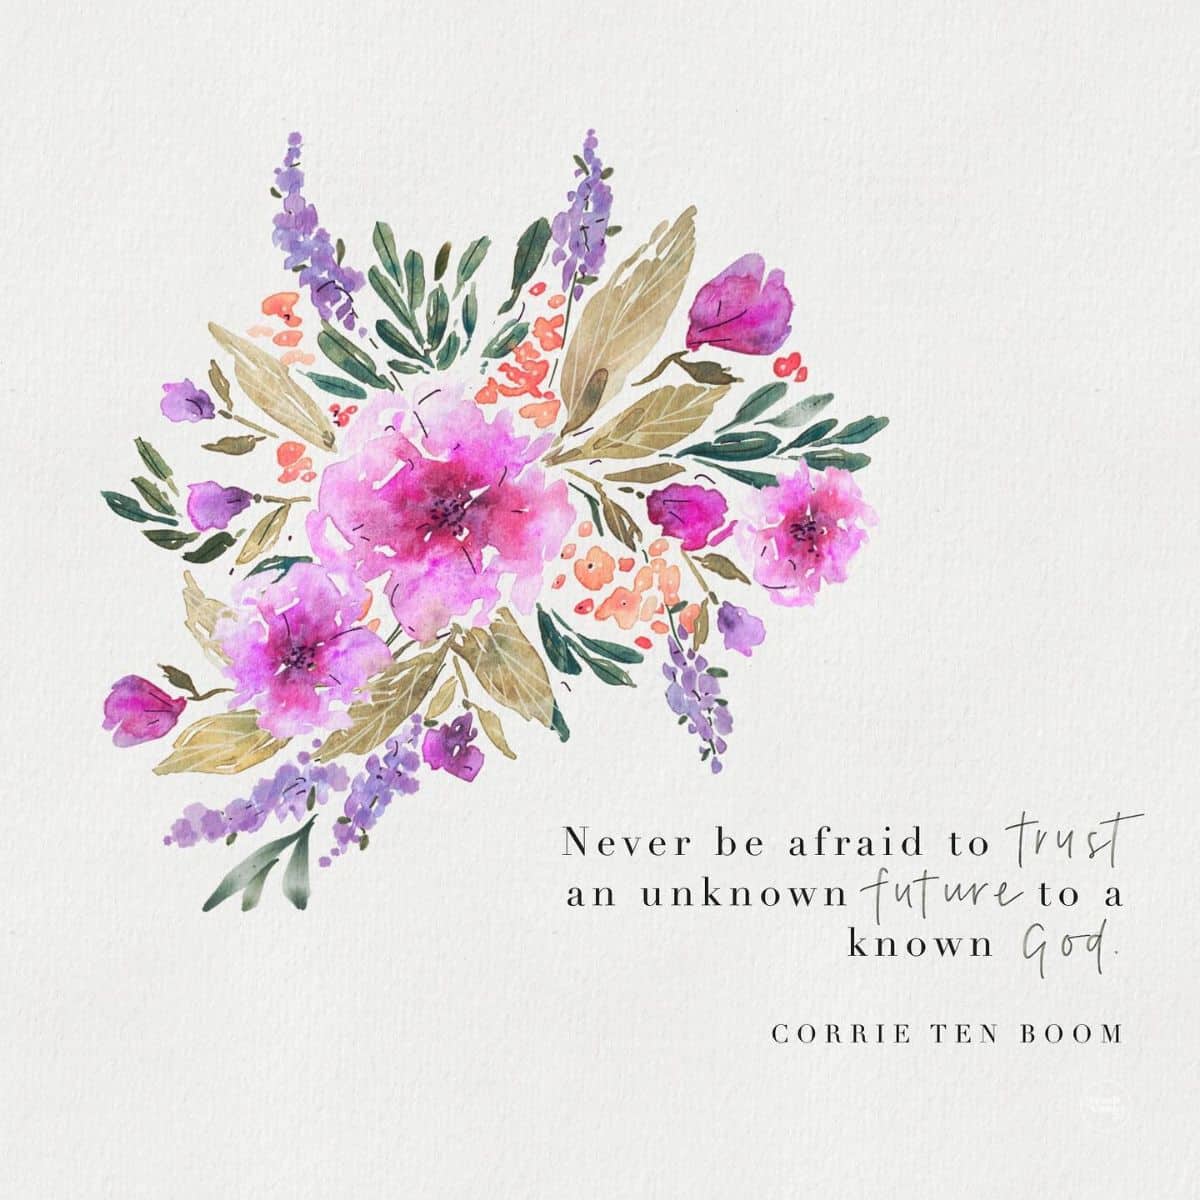 Beautiful floral water color and quote from Corrie ten Boom.